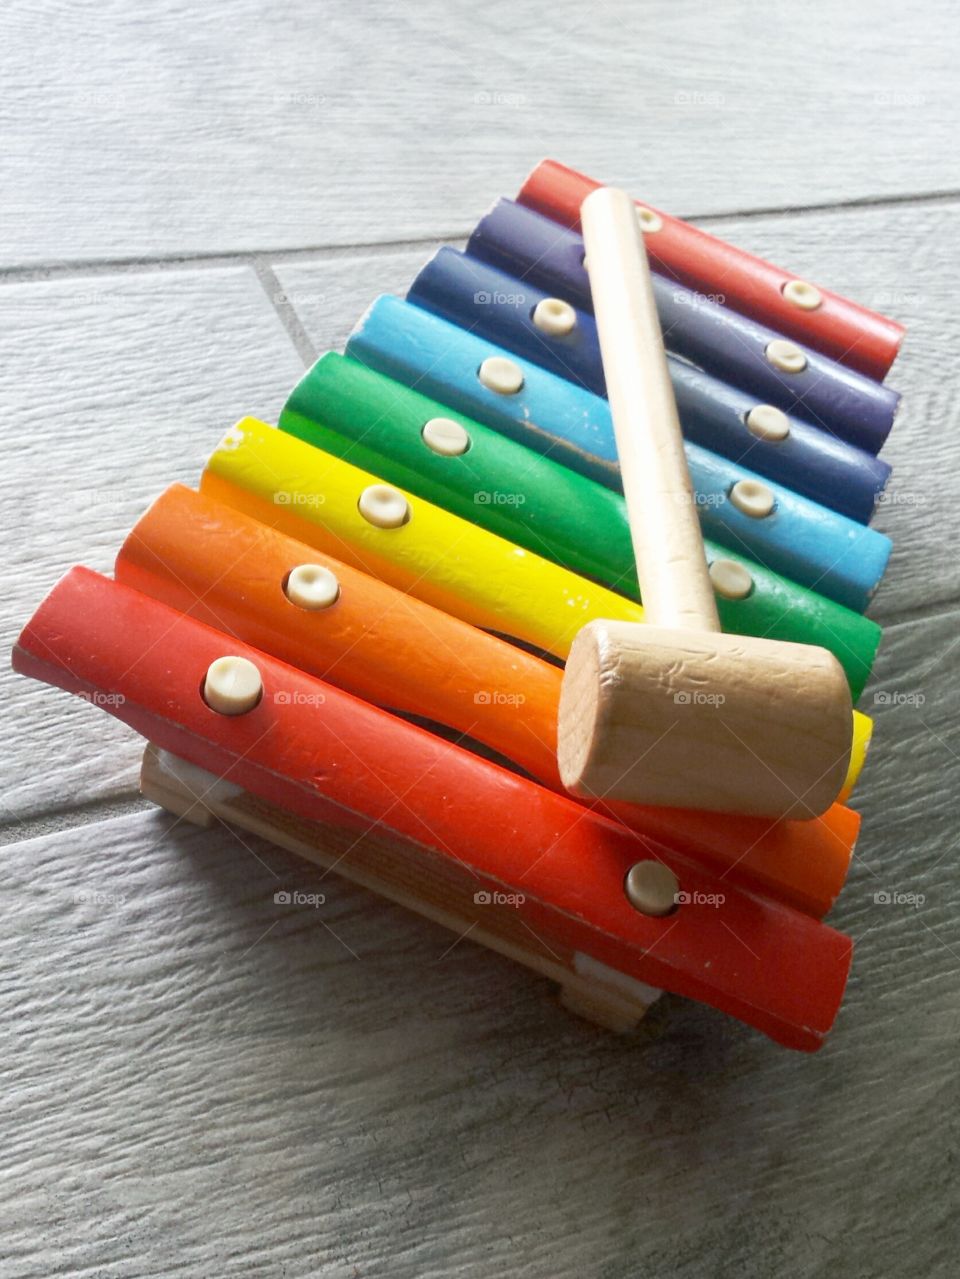 Wooden toy / wooden xylophone toy